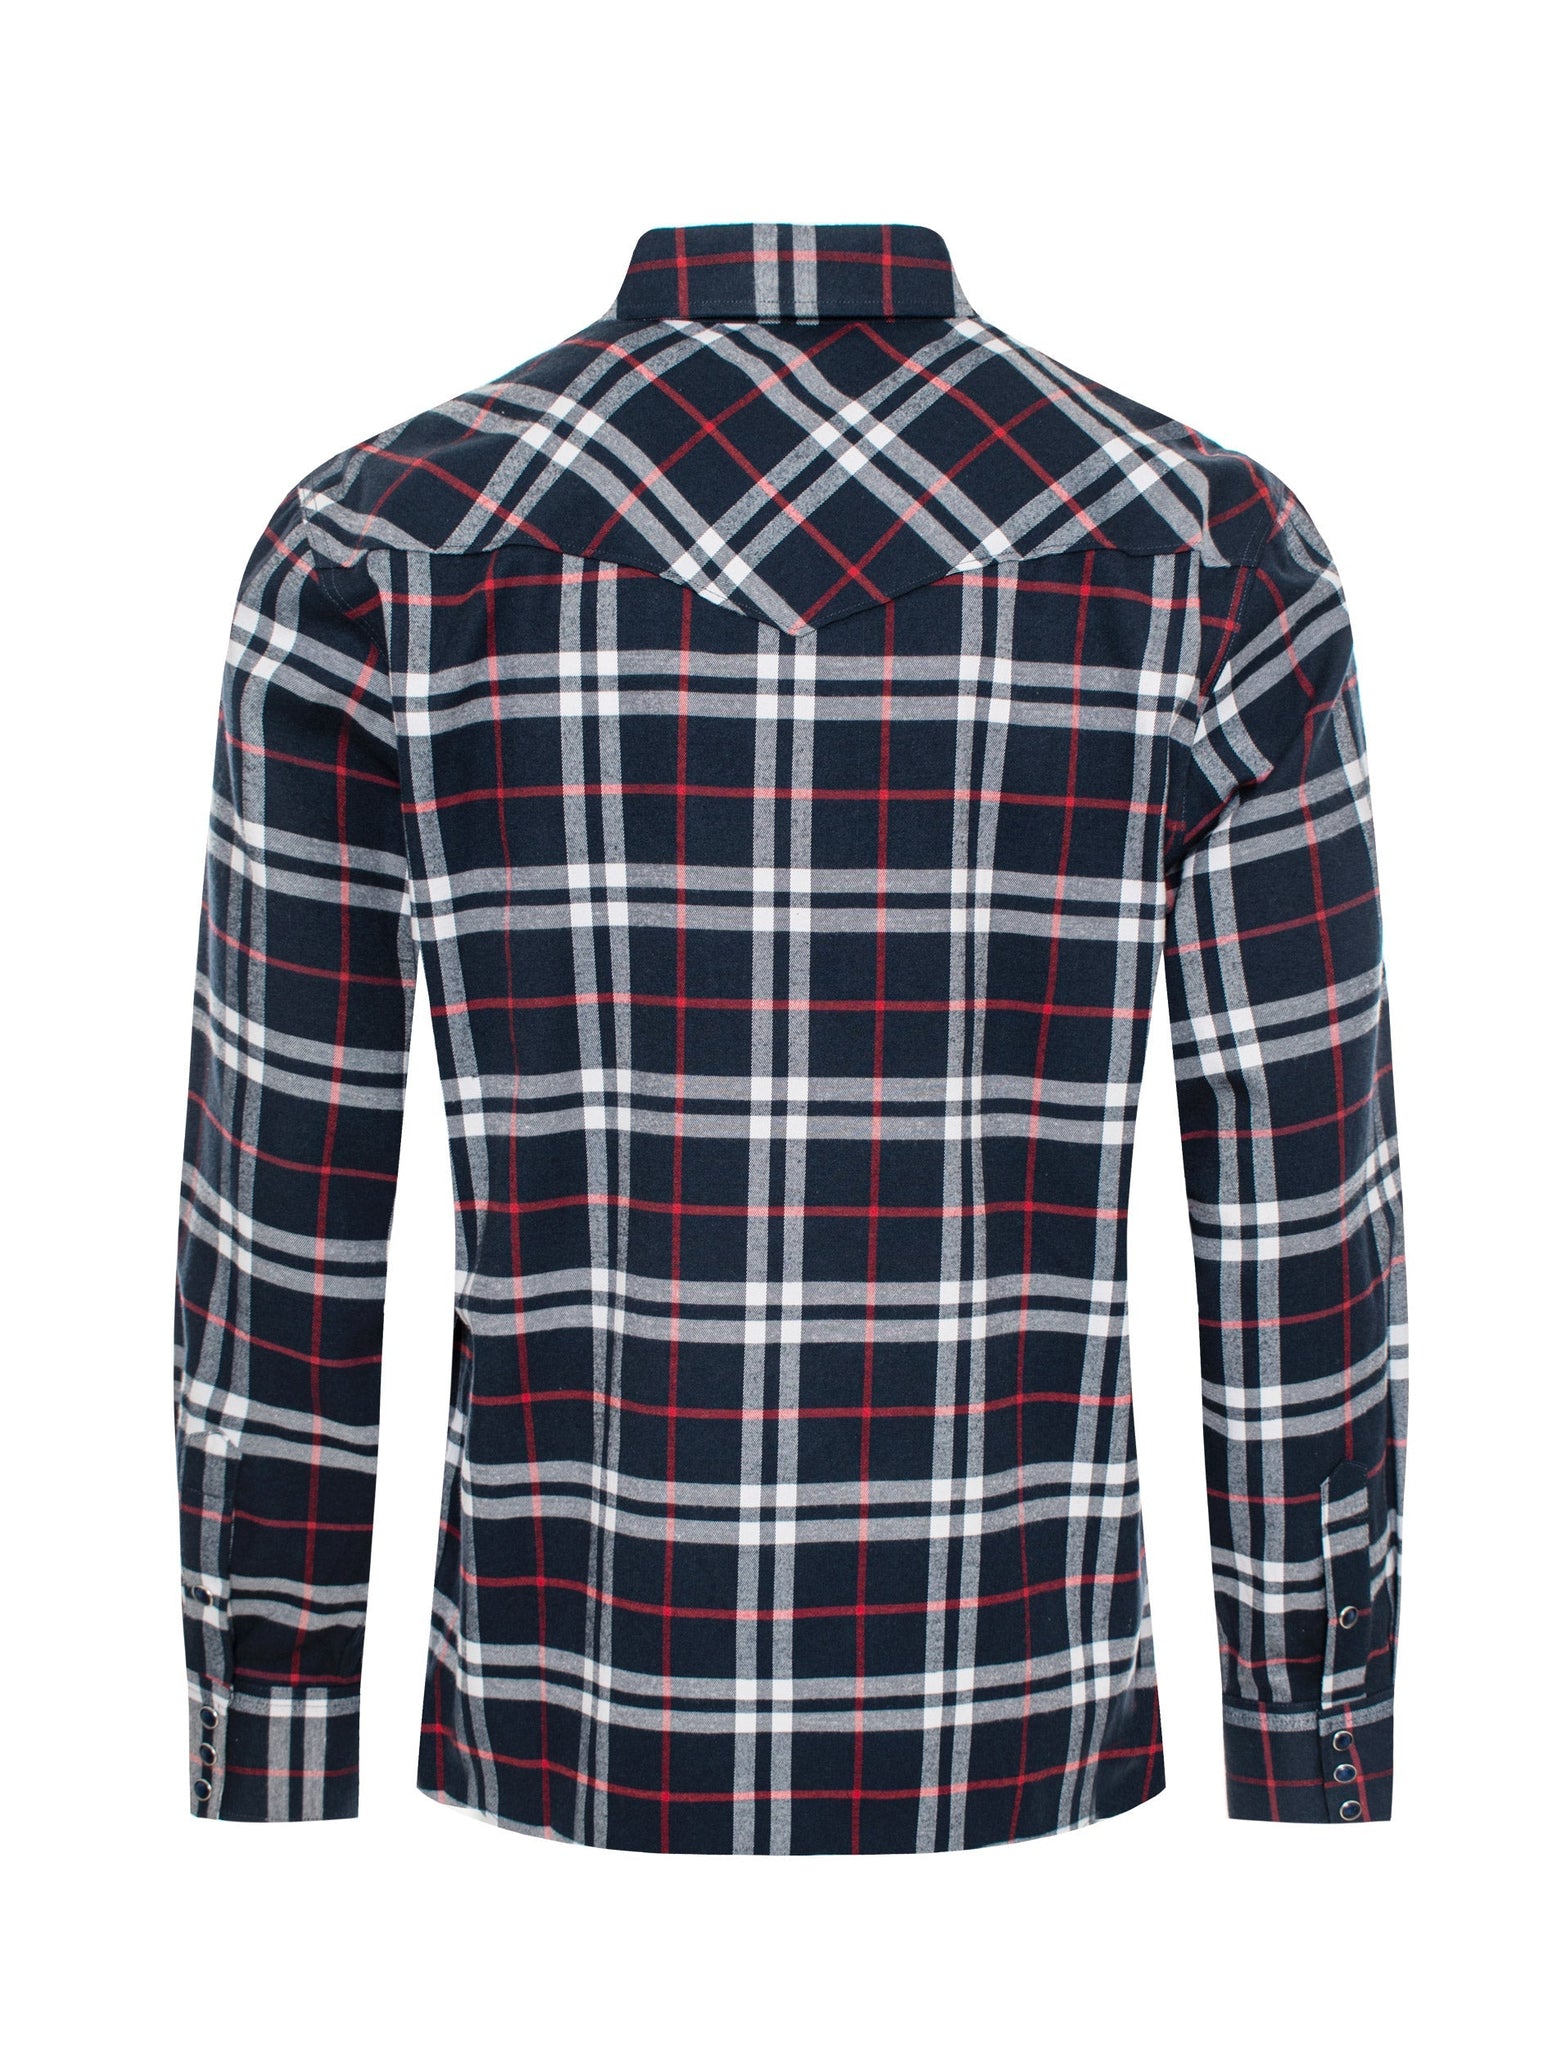 Men's Western Flannel Shirts With Snap Buttons -FLS300-306